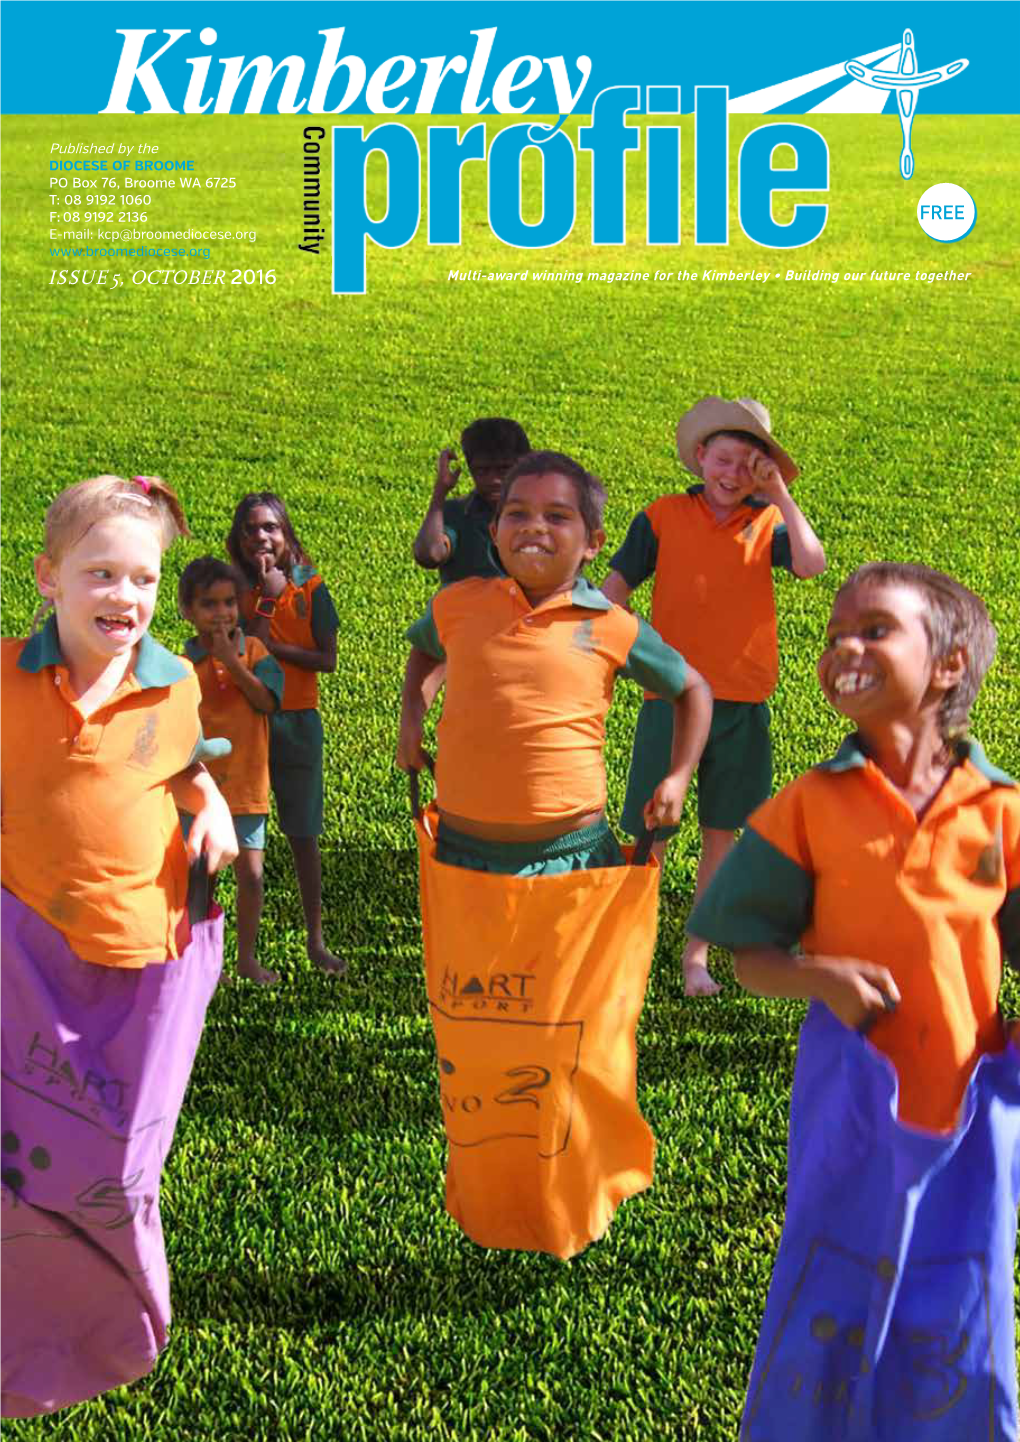 ISSUE 5, OCTOBER 2016 Multi-Award Winning Magazine for the Kimberley • Building Our Future Together Relationships Exhibition Education Package